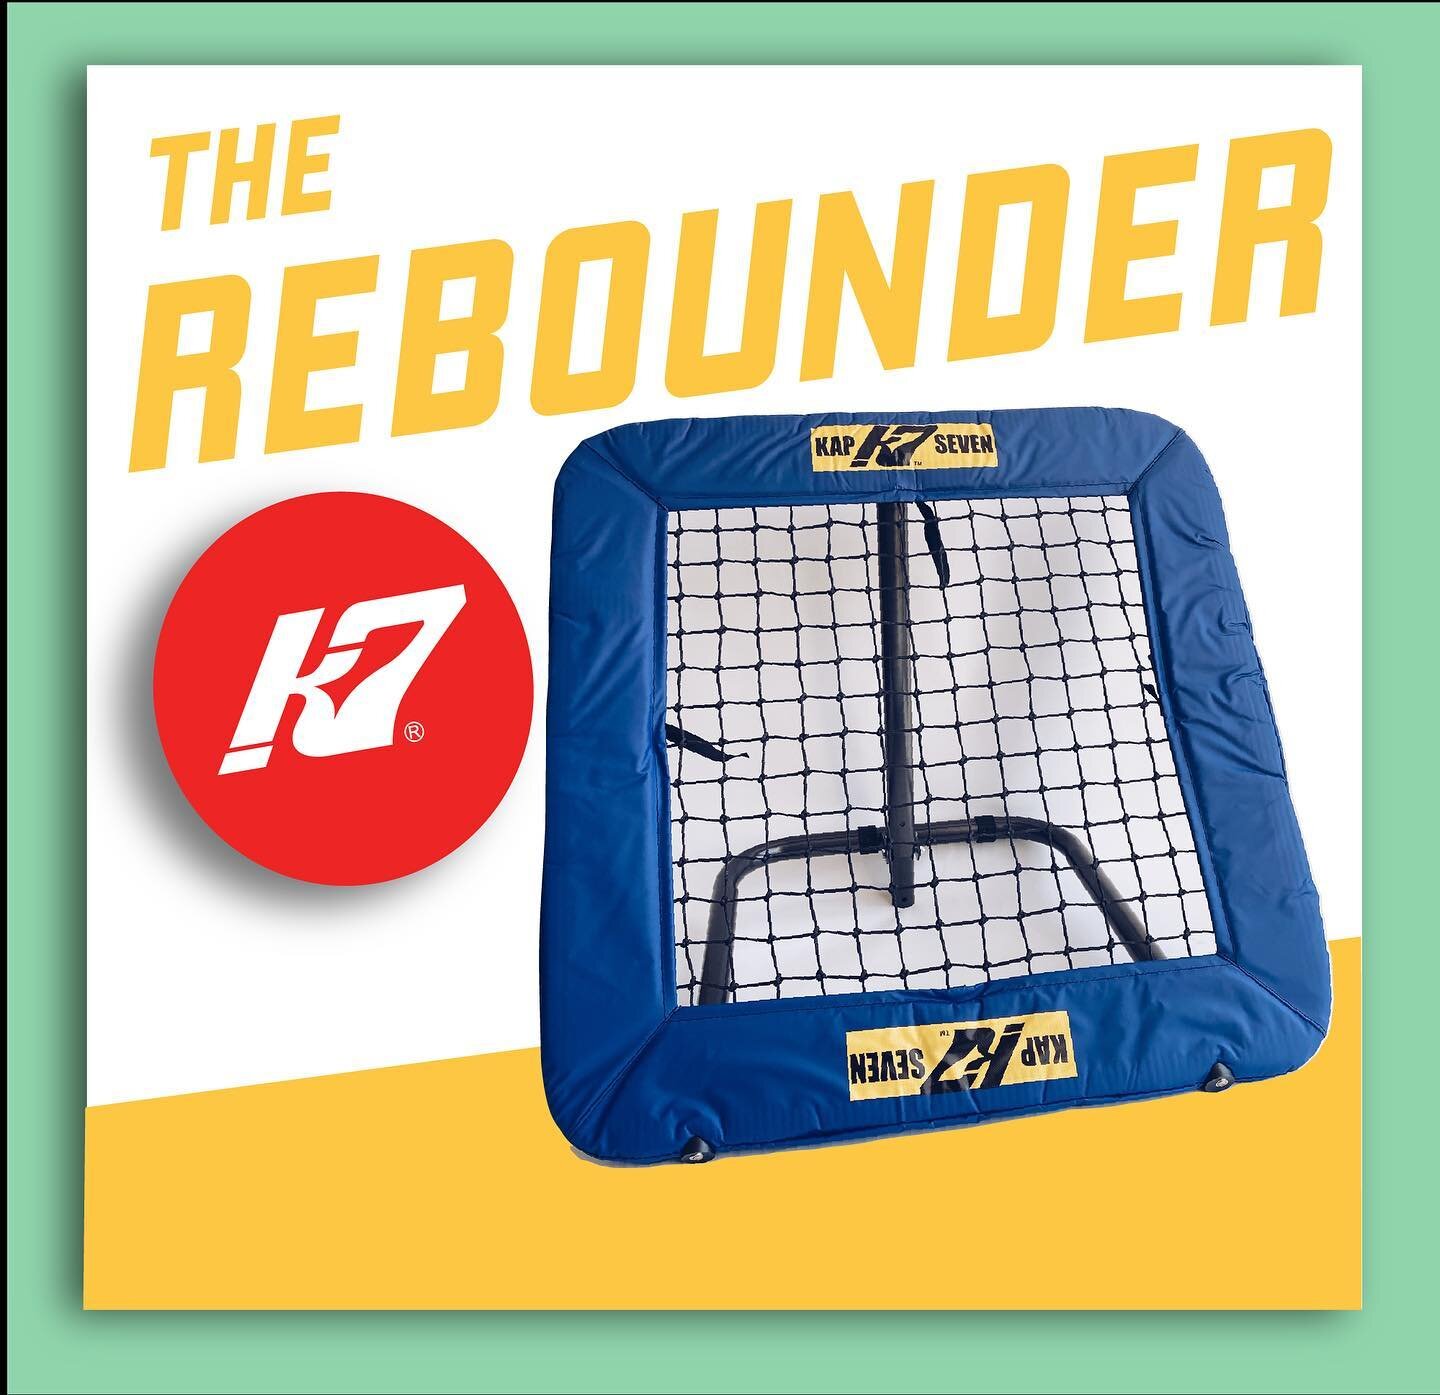 The #KAP7Rebounder takes your training to the next level. Pool or no pool, this is our favorite K7 equipment for training 💪🏾

🤽🏾&zwj;♂️No excuses for training alone!
🤽🏾&zwj;♀️Increased accuracy!
🤽🏼&zwj;♂️Improve legs and passing skills!
🤽🏻&